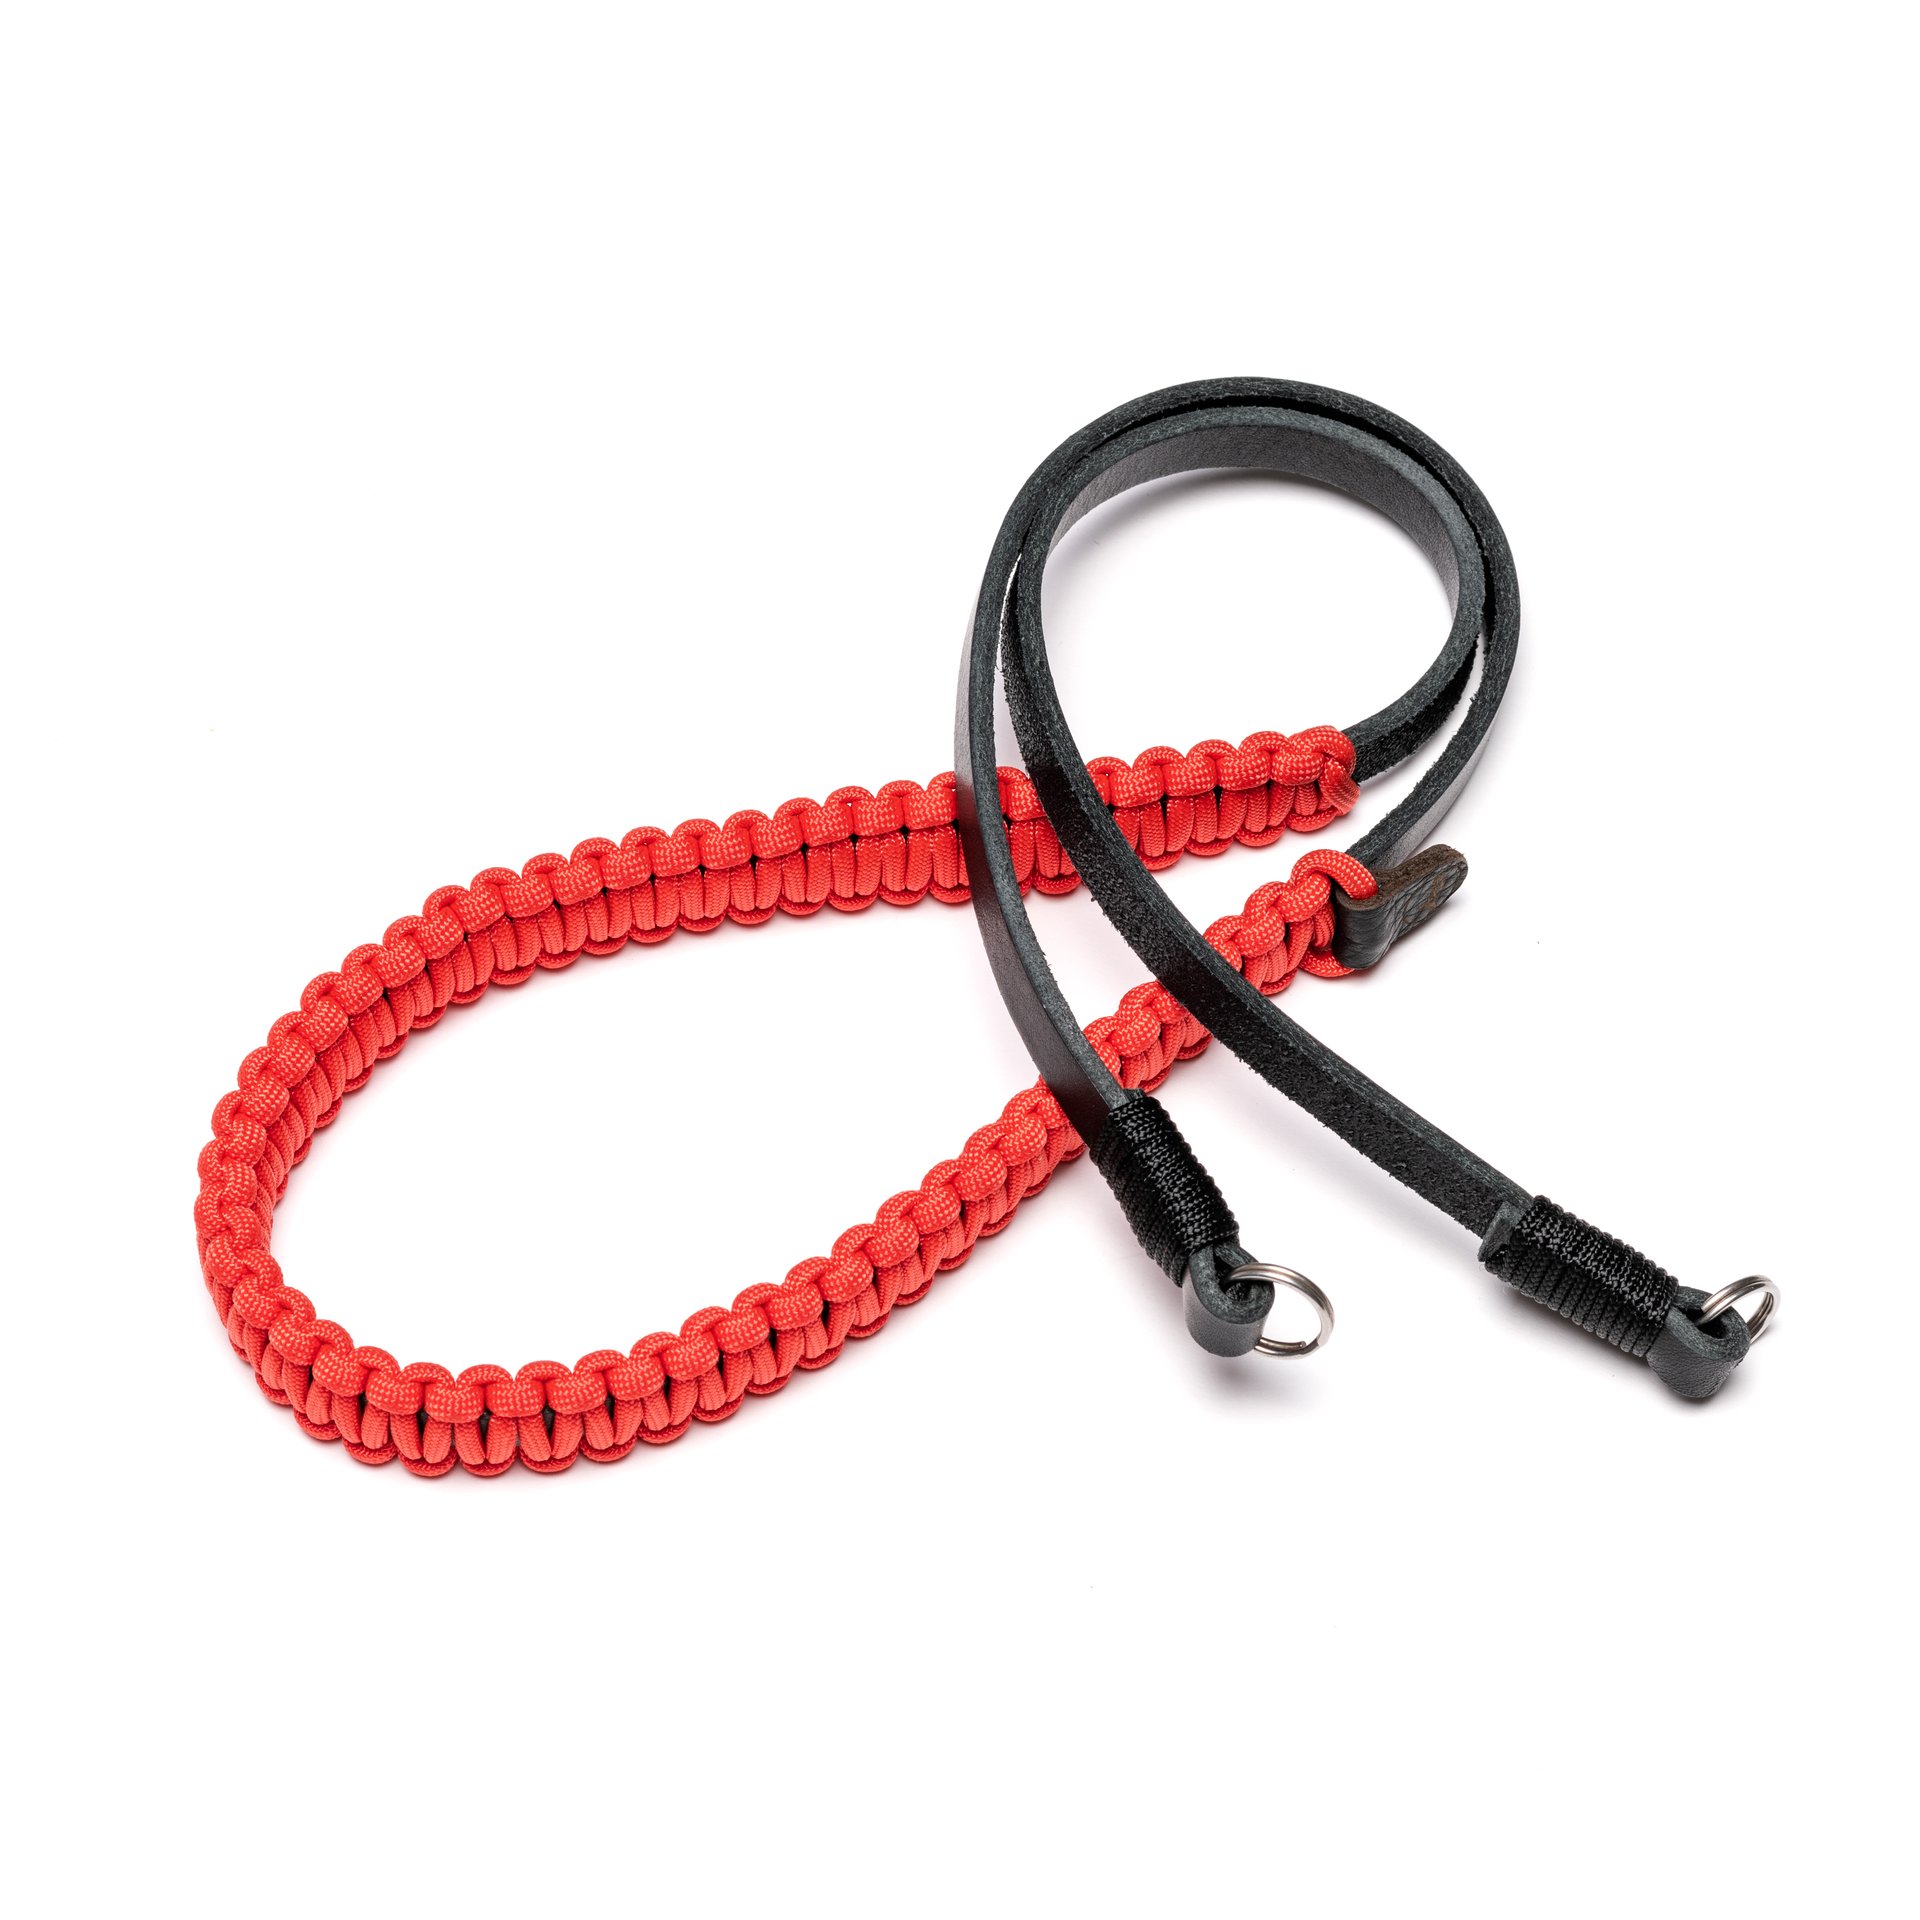 TThumbnail image for Leica COOPH Paracord Strap - Black/red